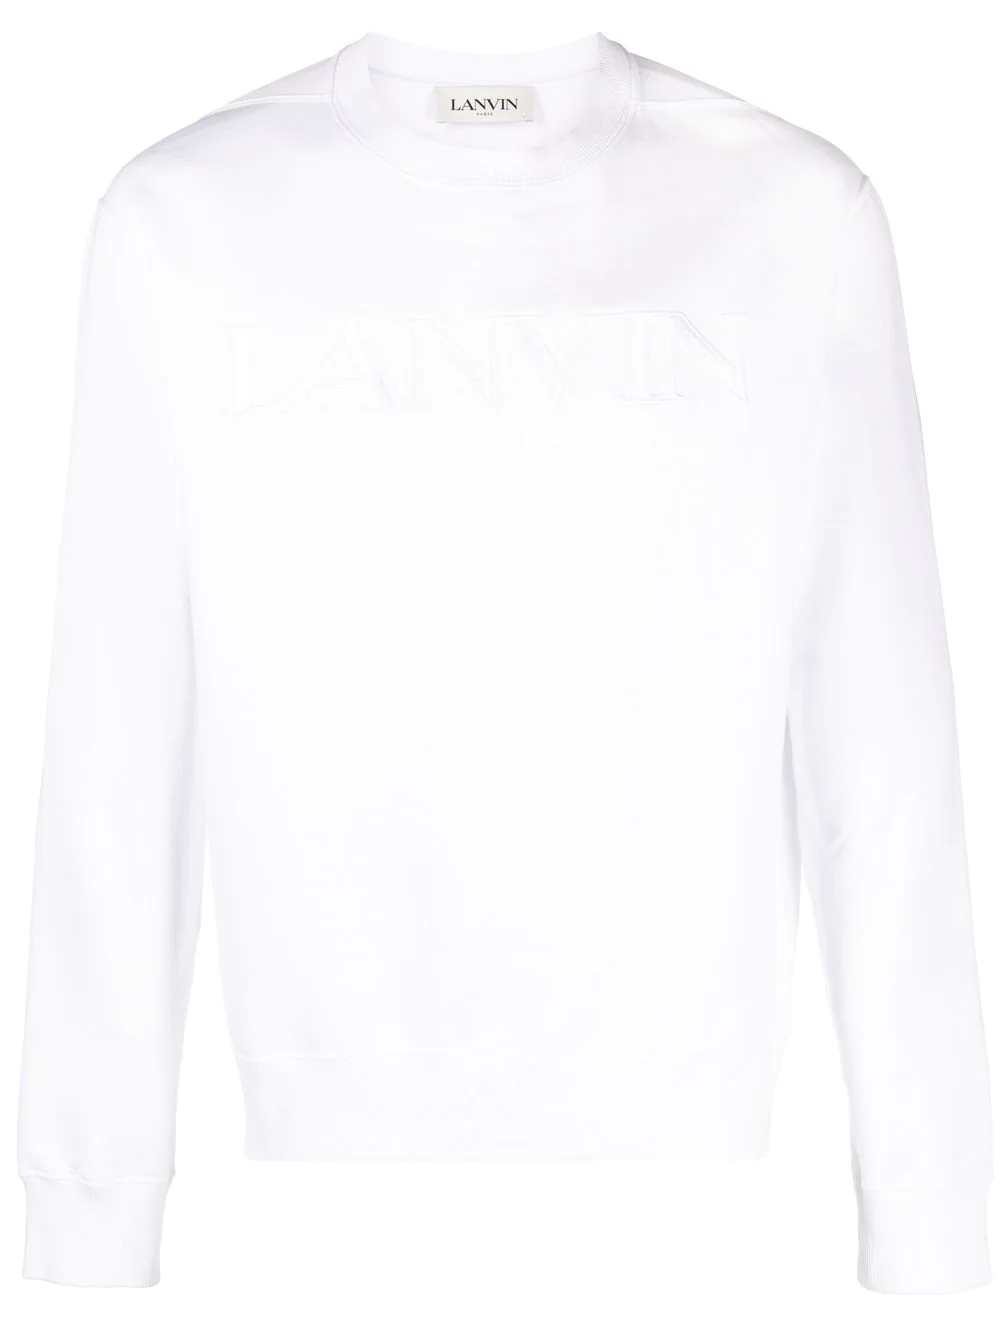 LANVIN SWEATSHIRT WITH EMBROIDERY